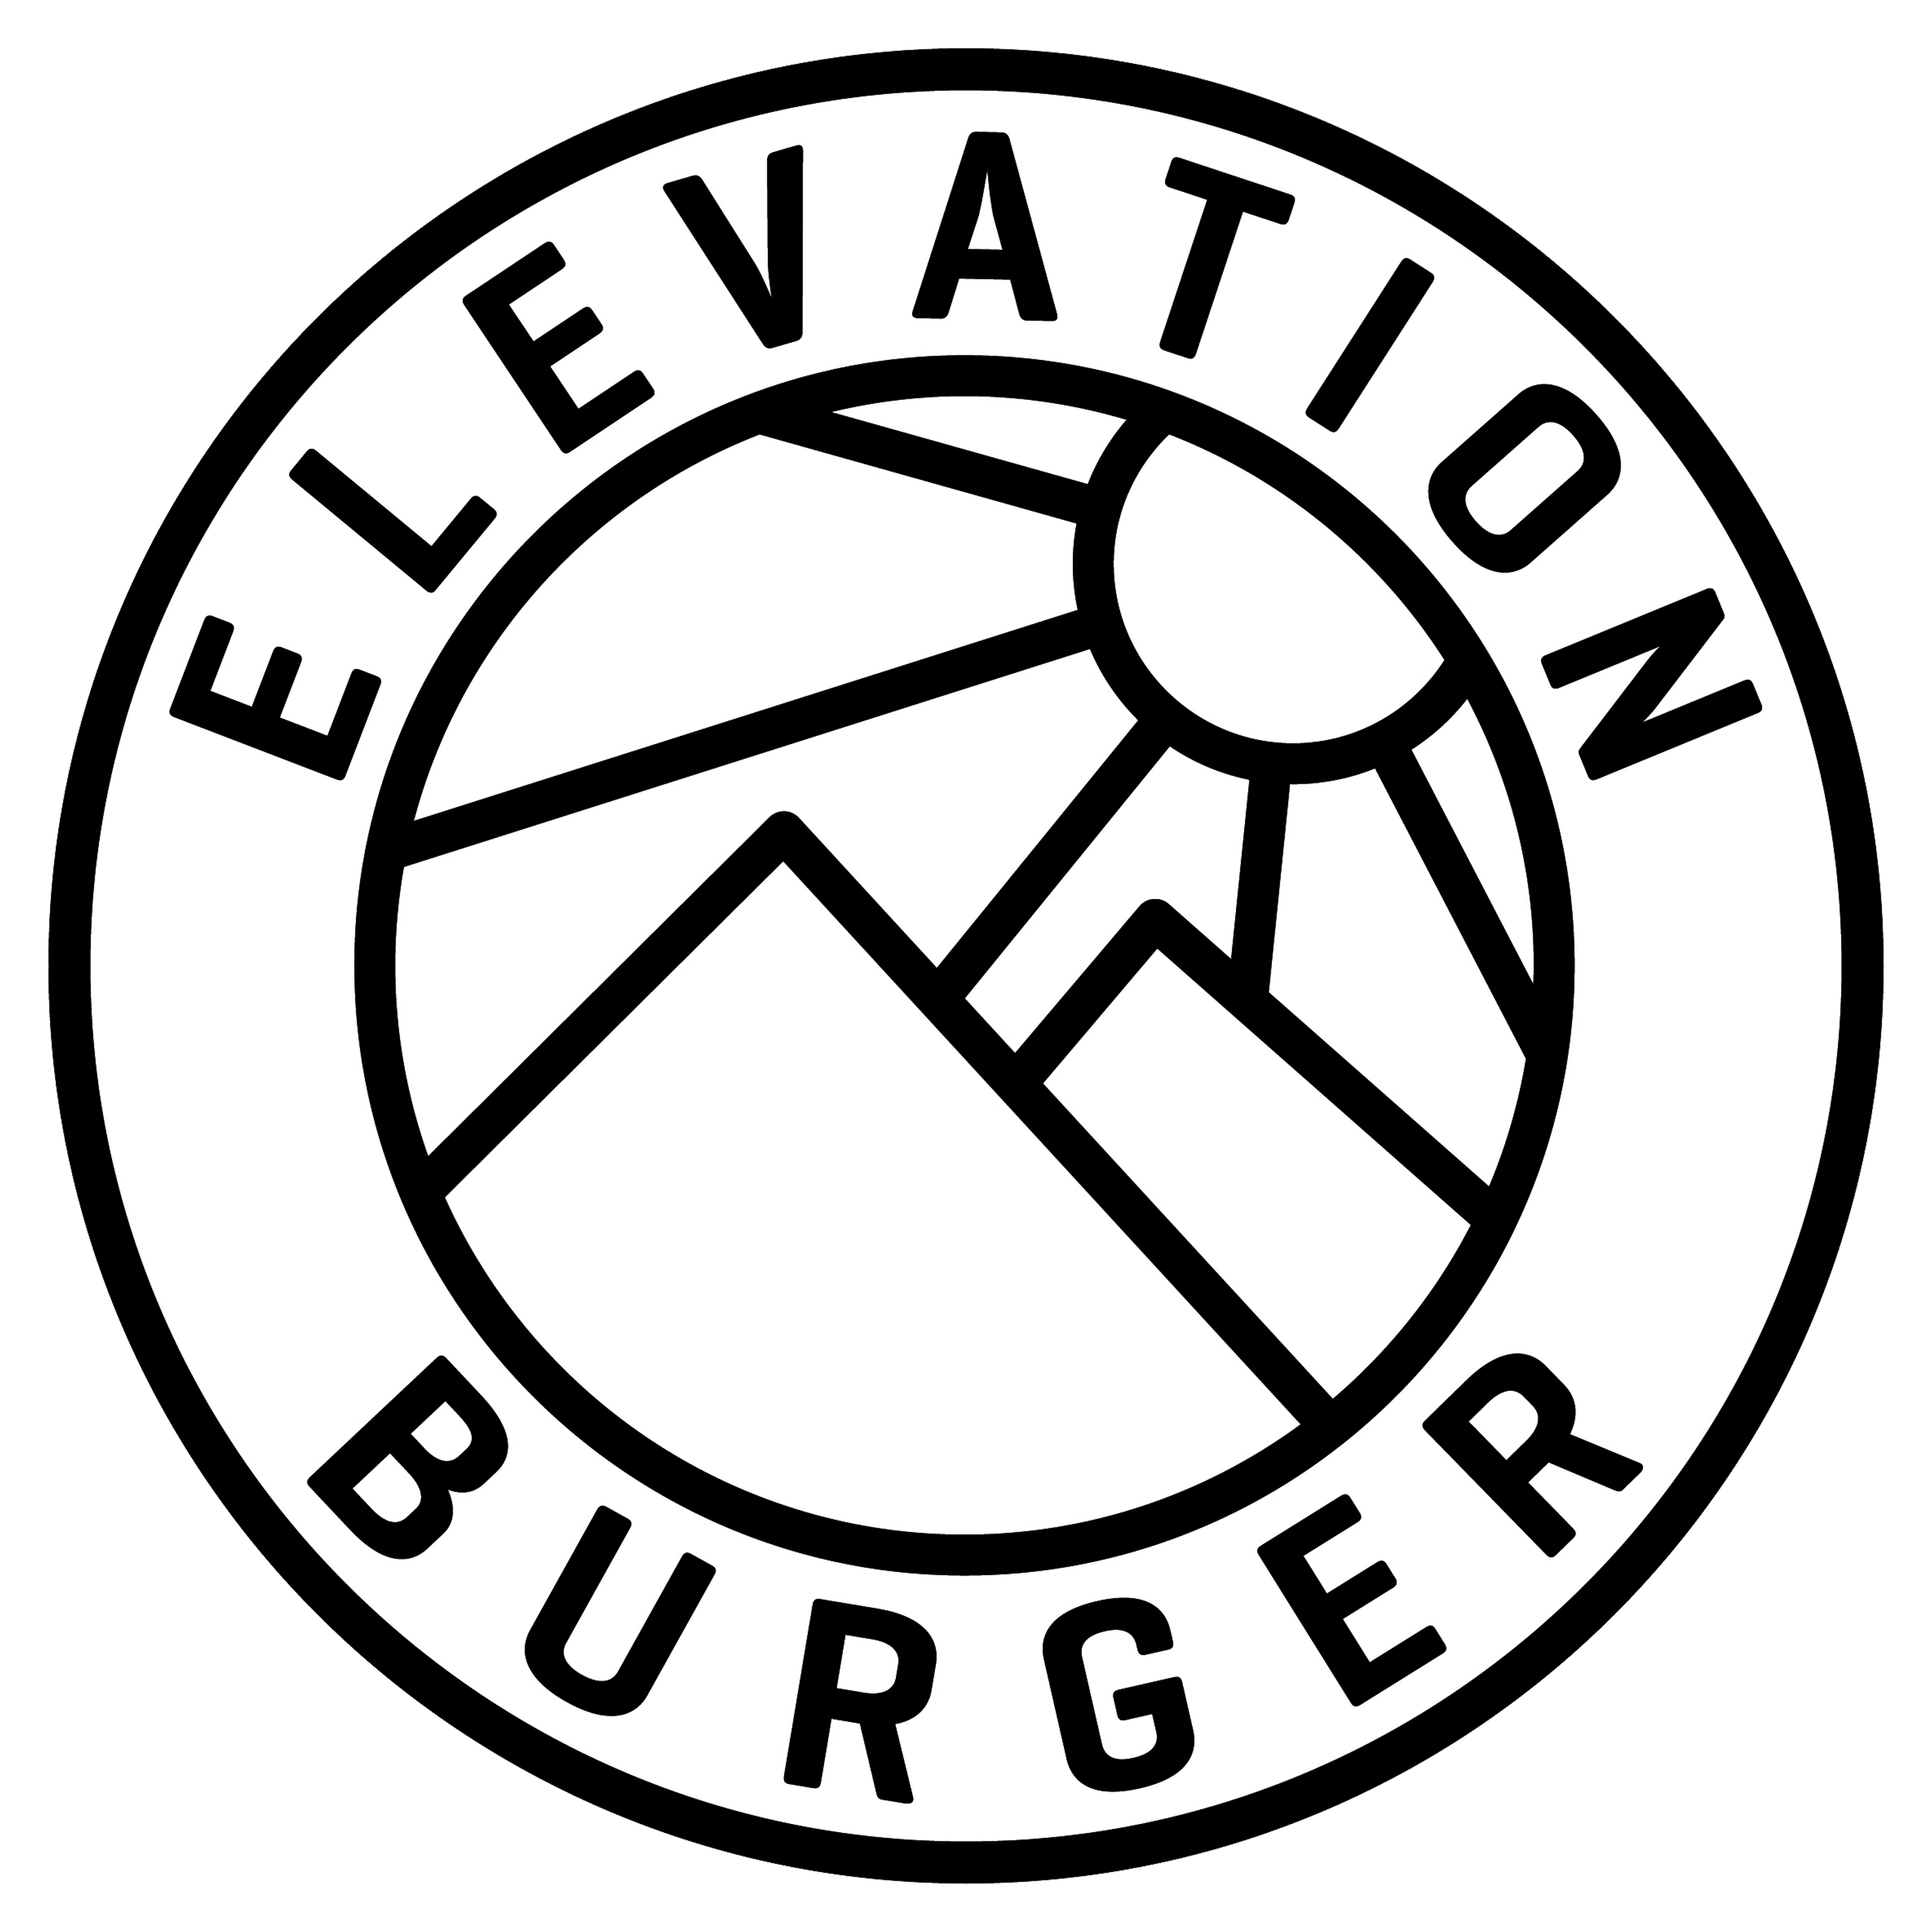 Elevation Burger Willow Grove Highlights the Health Benefits of Burgers